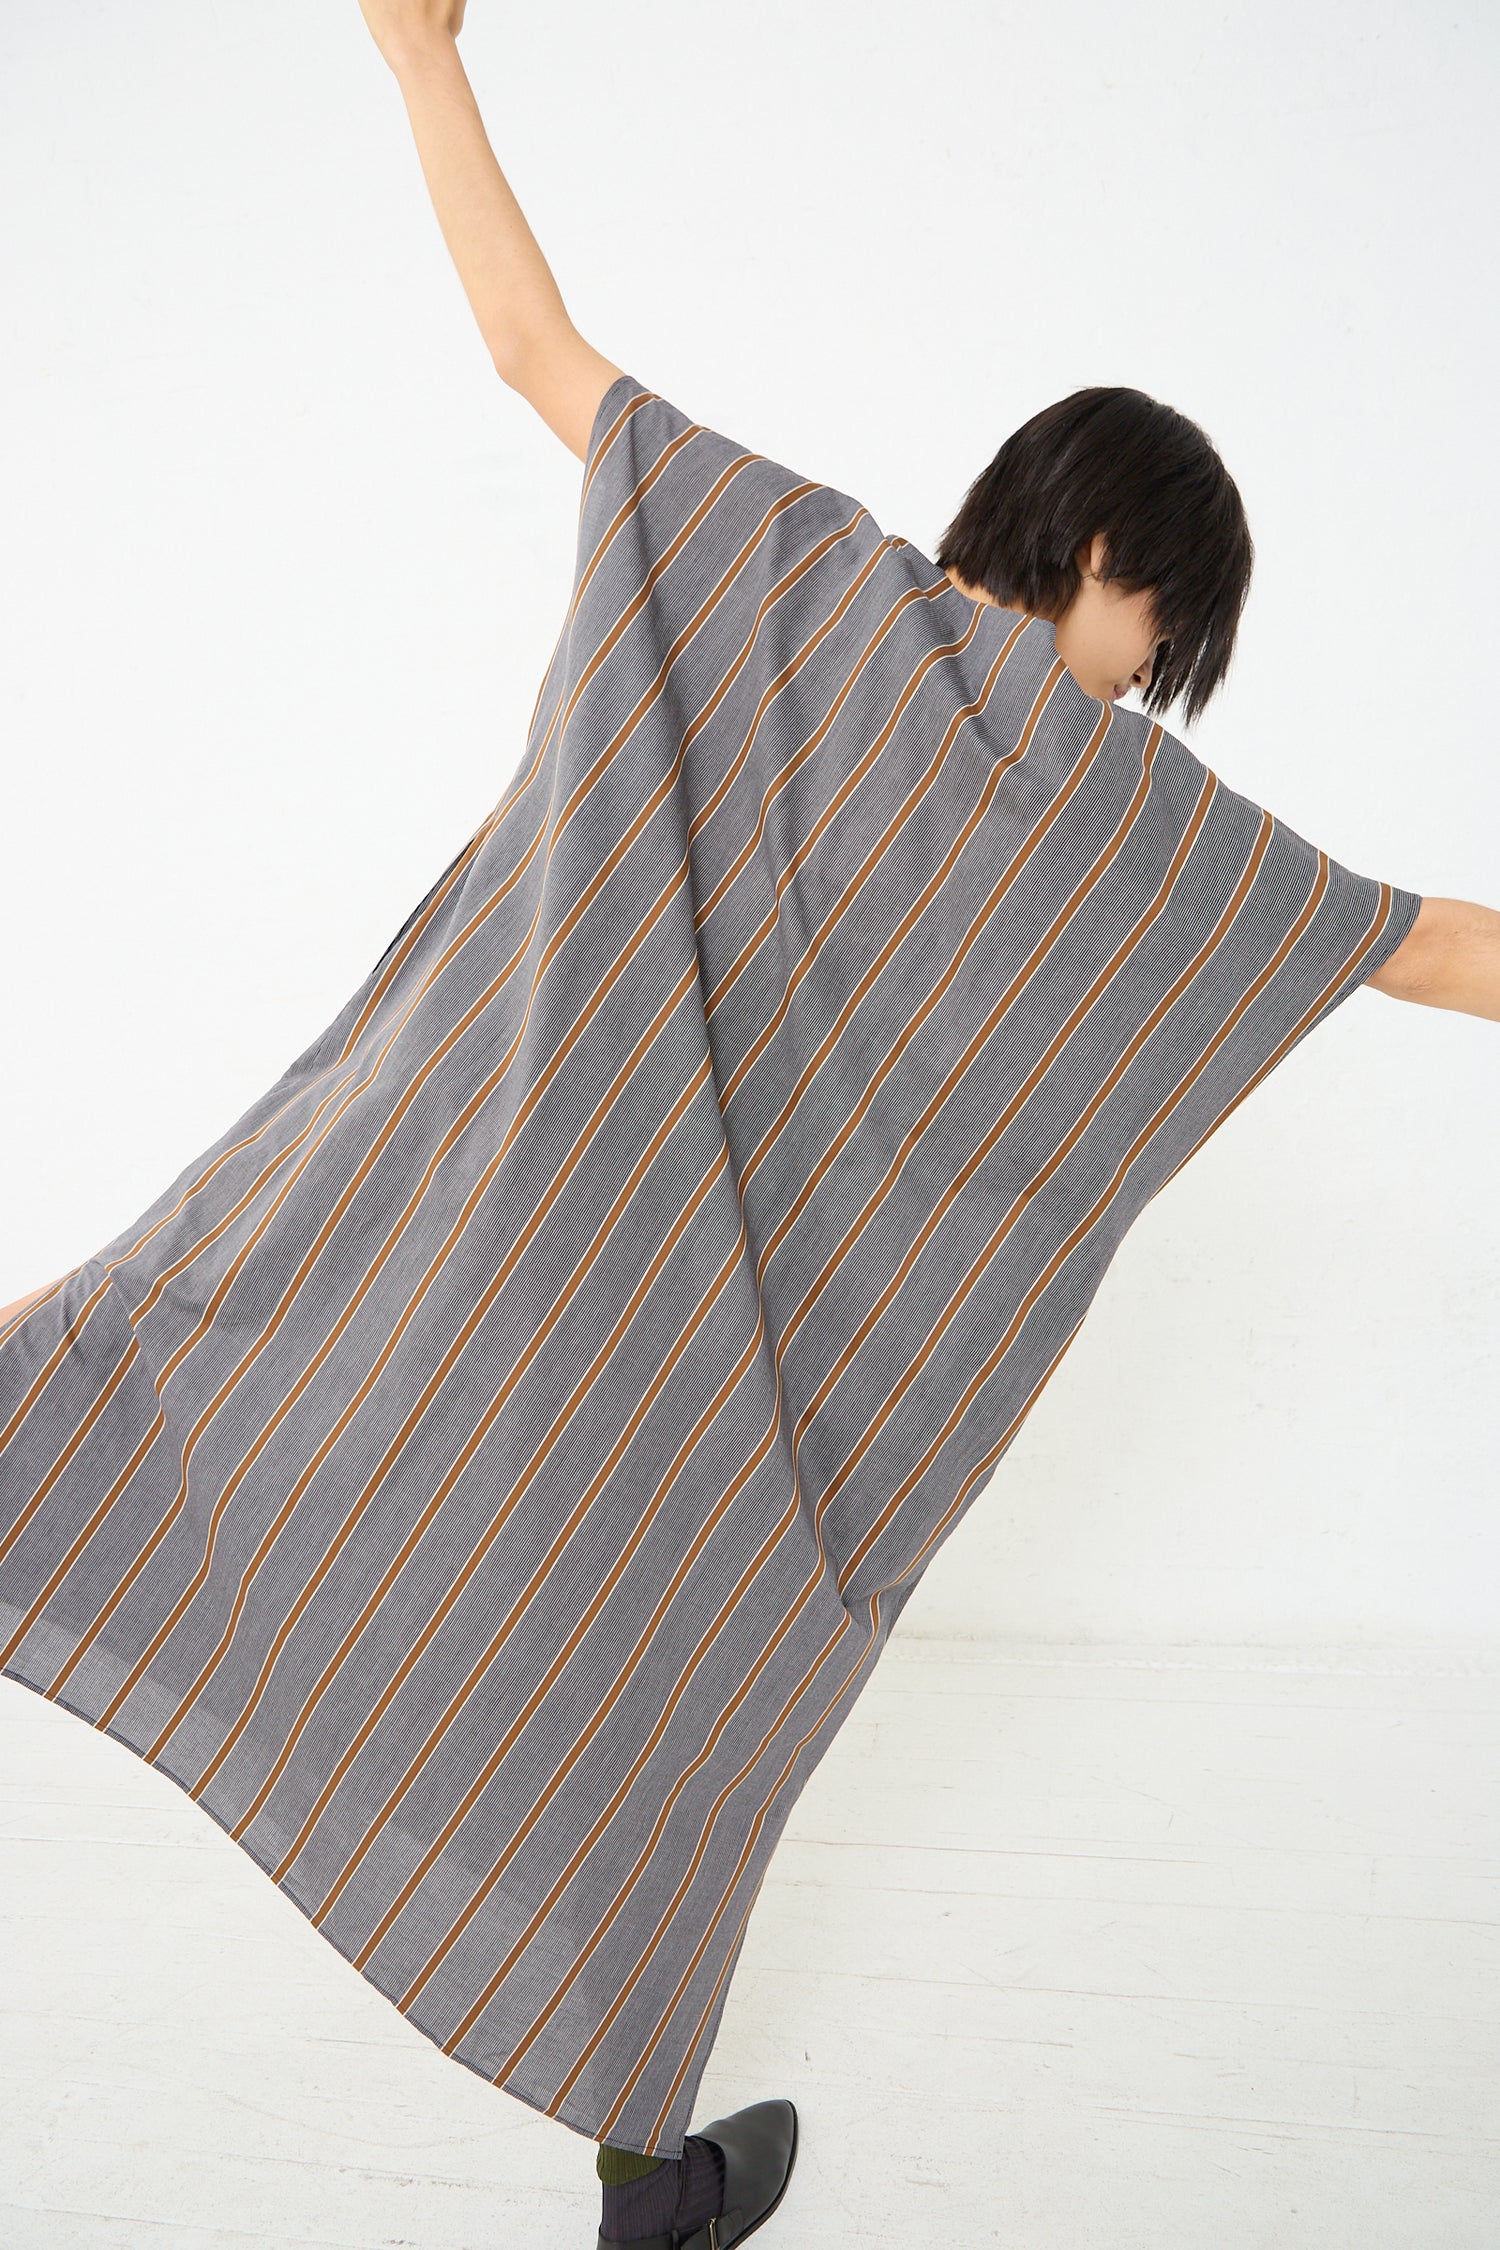 A woman donning an oversized Cristaseya Cotton Caftan in Striped Black and Noisette made from lightweight Japanese cotton with a stylish stripe pattern.